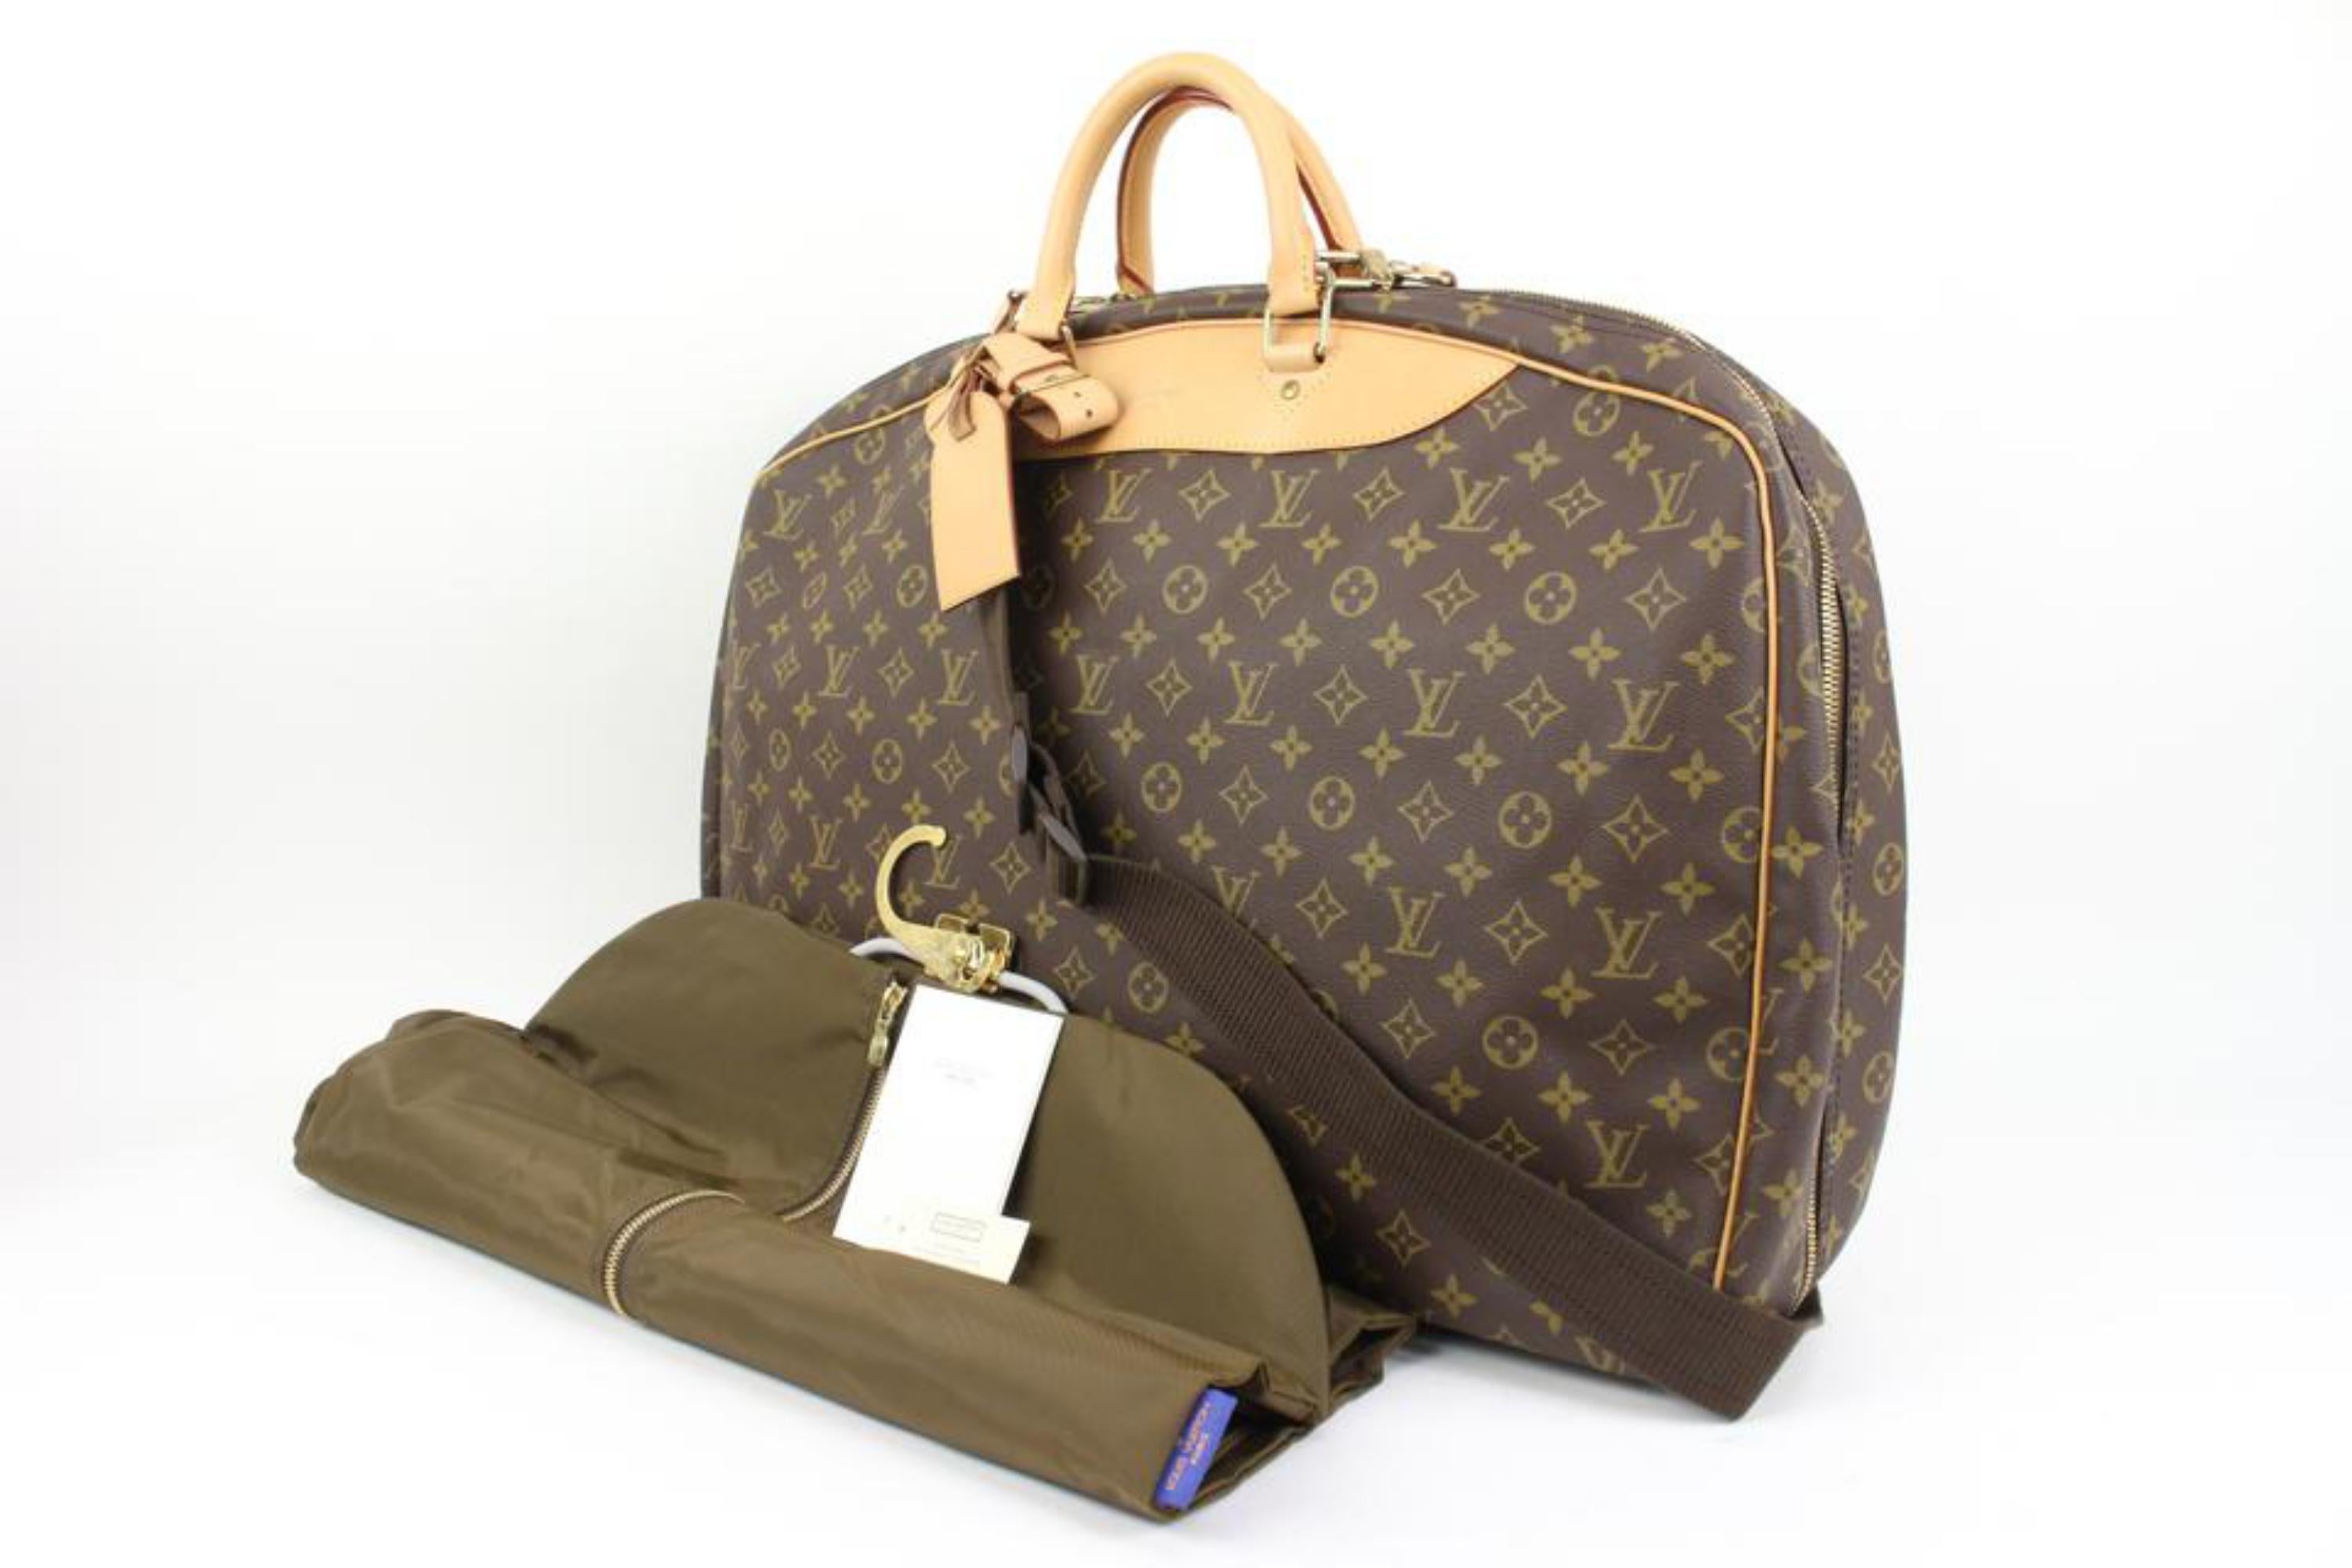 Louis Vuitton Monogram Alize 1 Poches Bandouliere Travel Garment Duffle Bag44lk4
Date Code/Serial Number: VI1926
Made In: France
Measurements: Length:  21